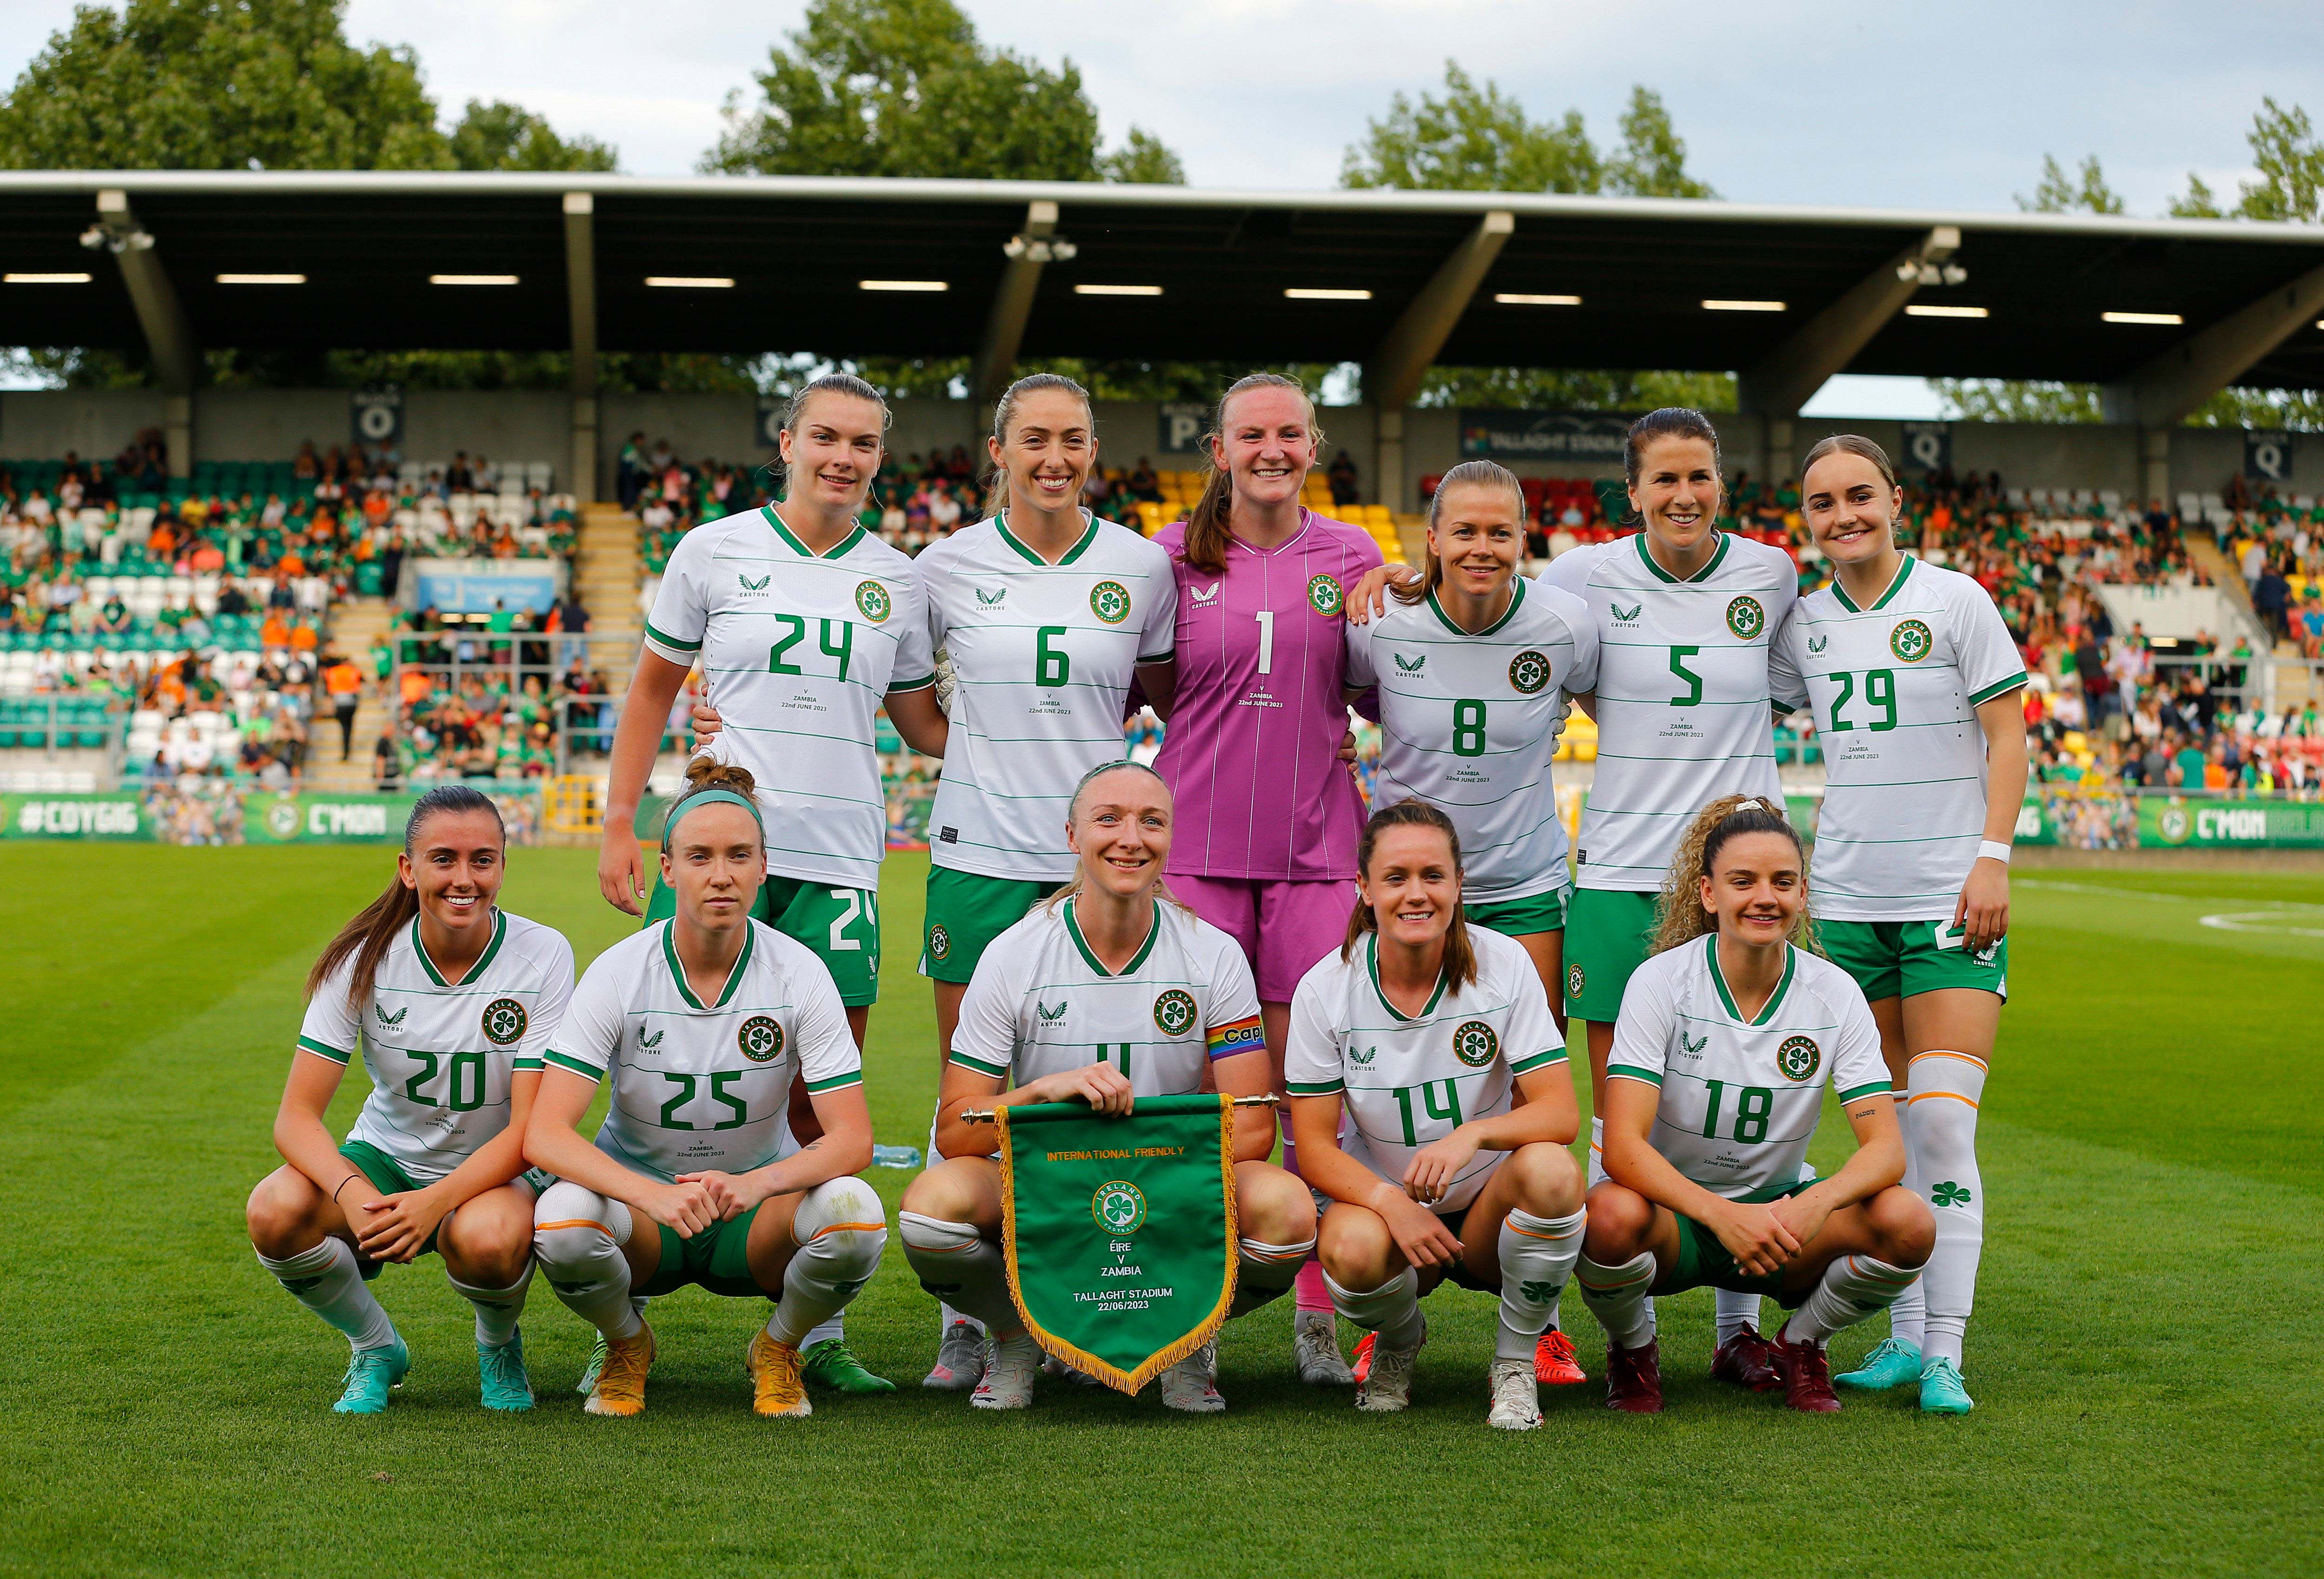 The Irish squad pose for a team photo prior to kickoff